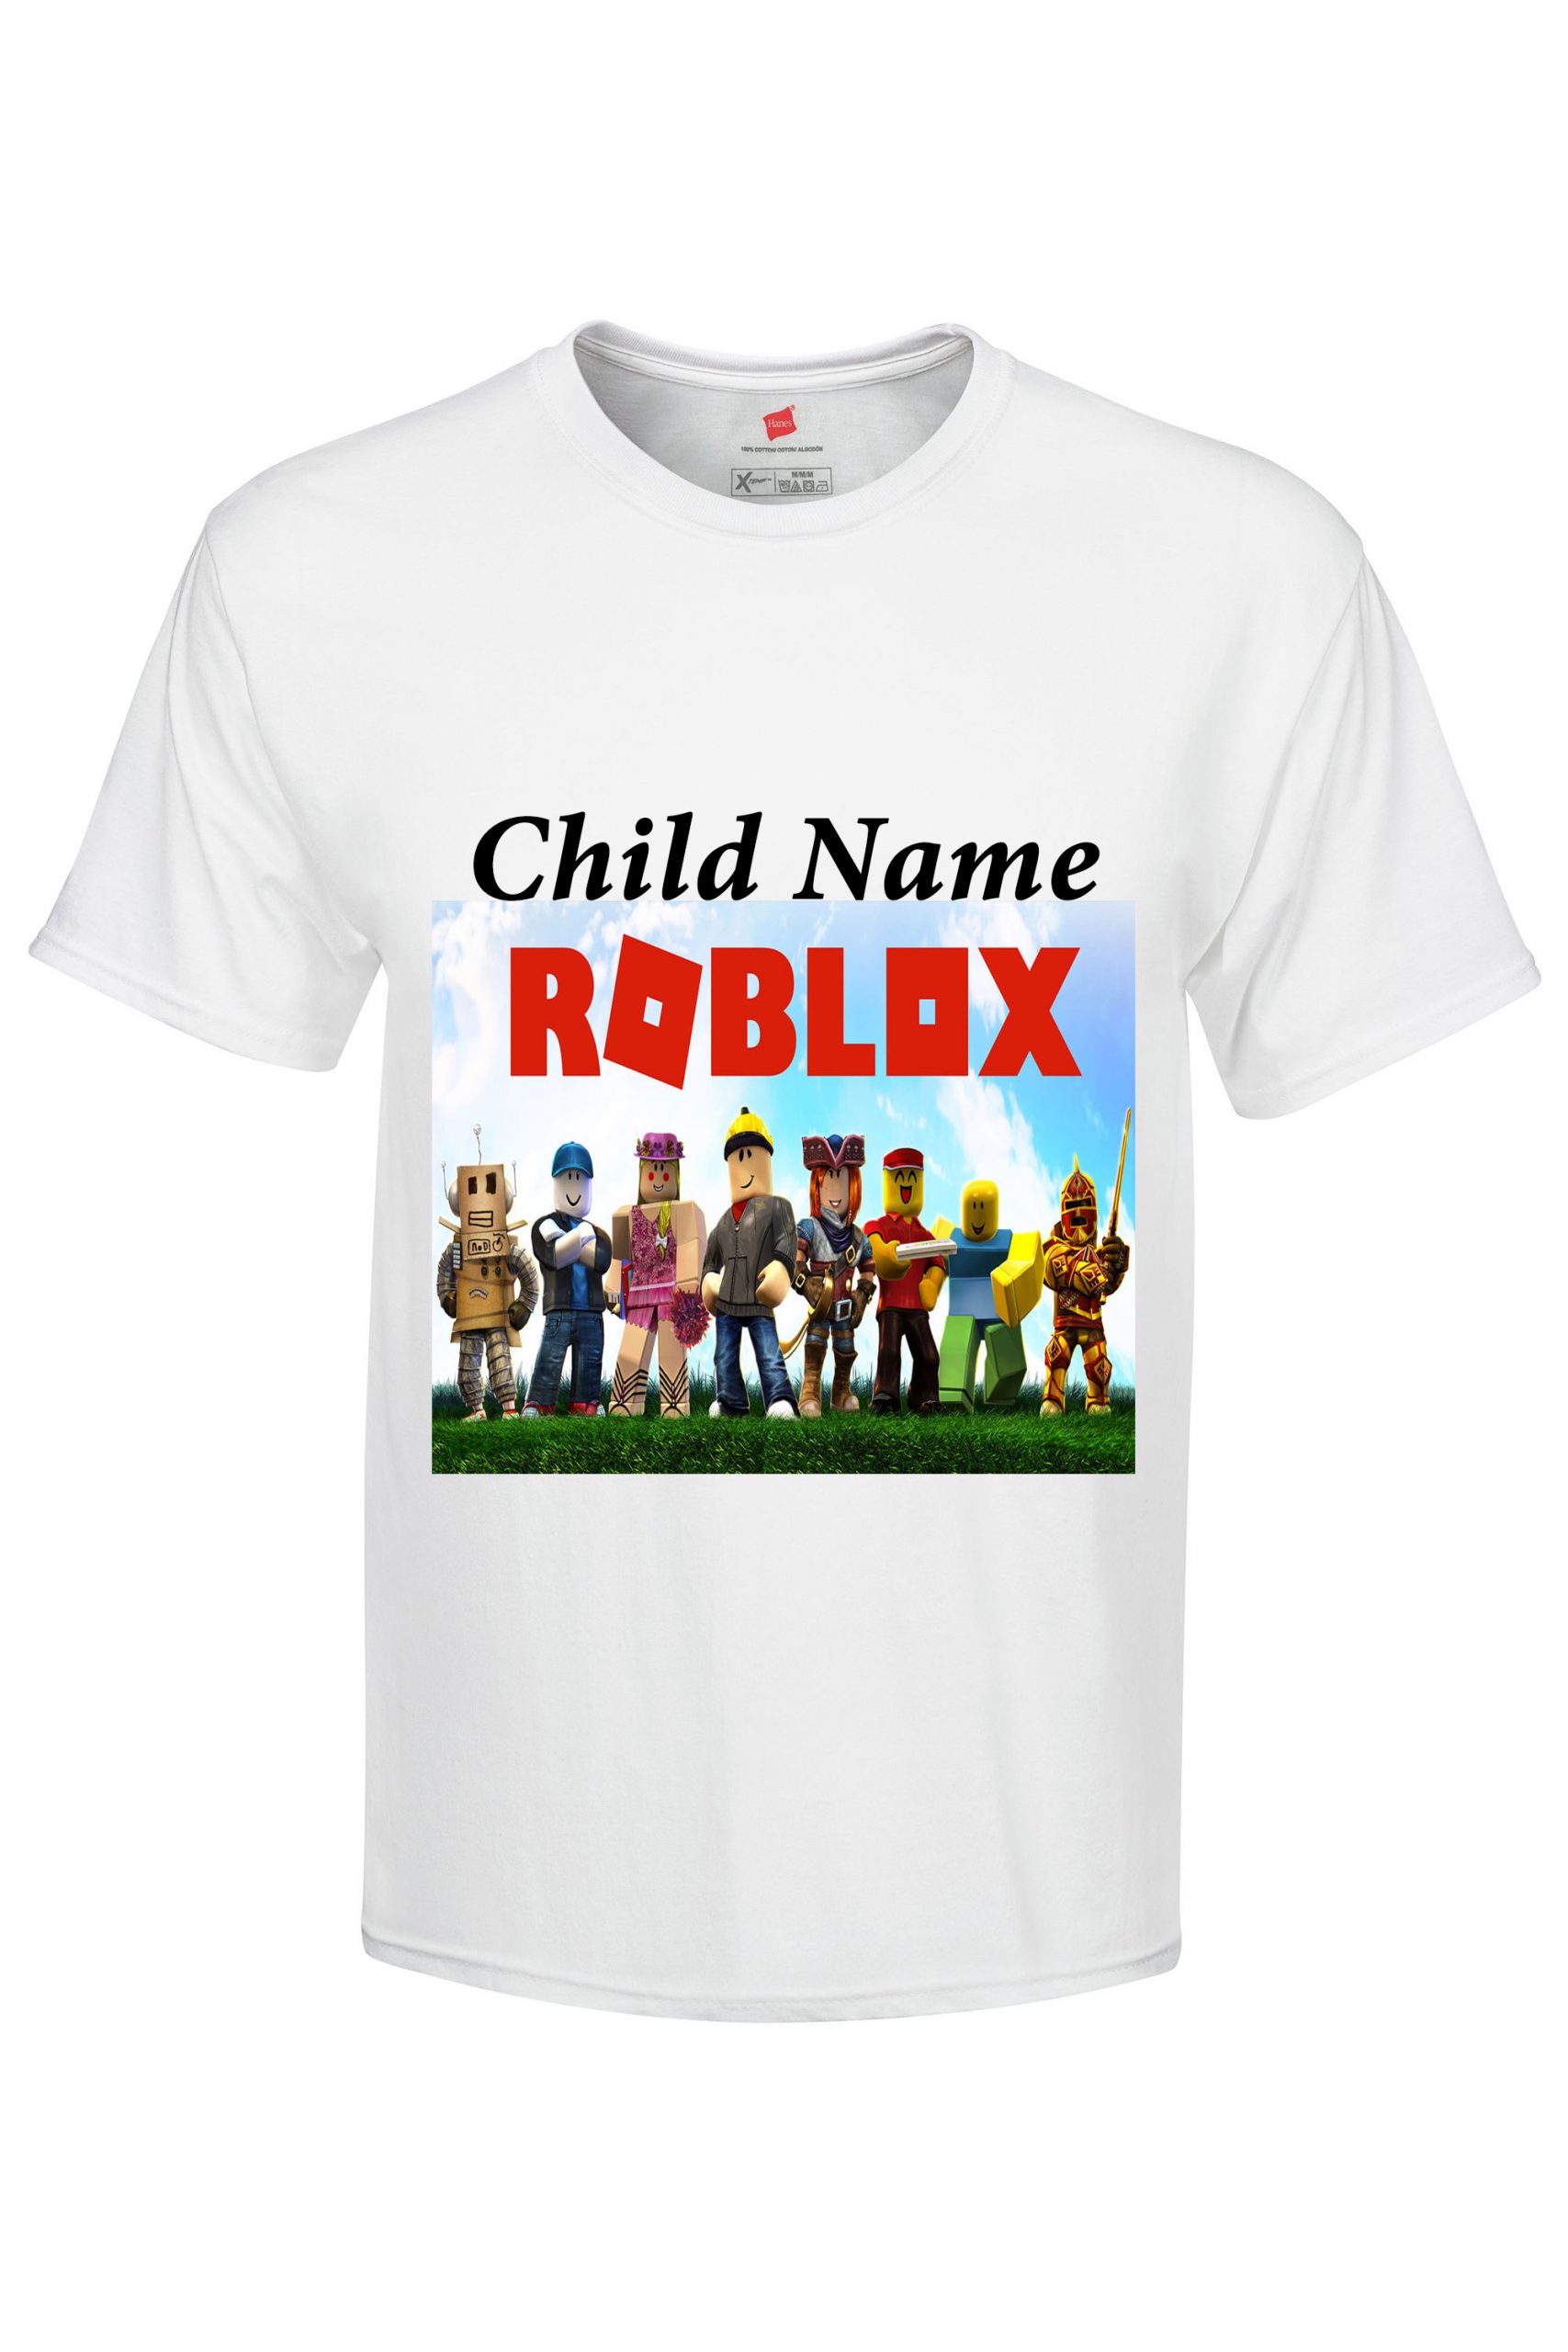 Roblox This That Gifts Ireland - baby carrier roblox t shirt